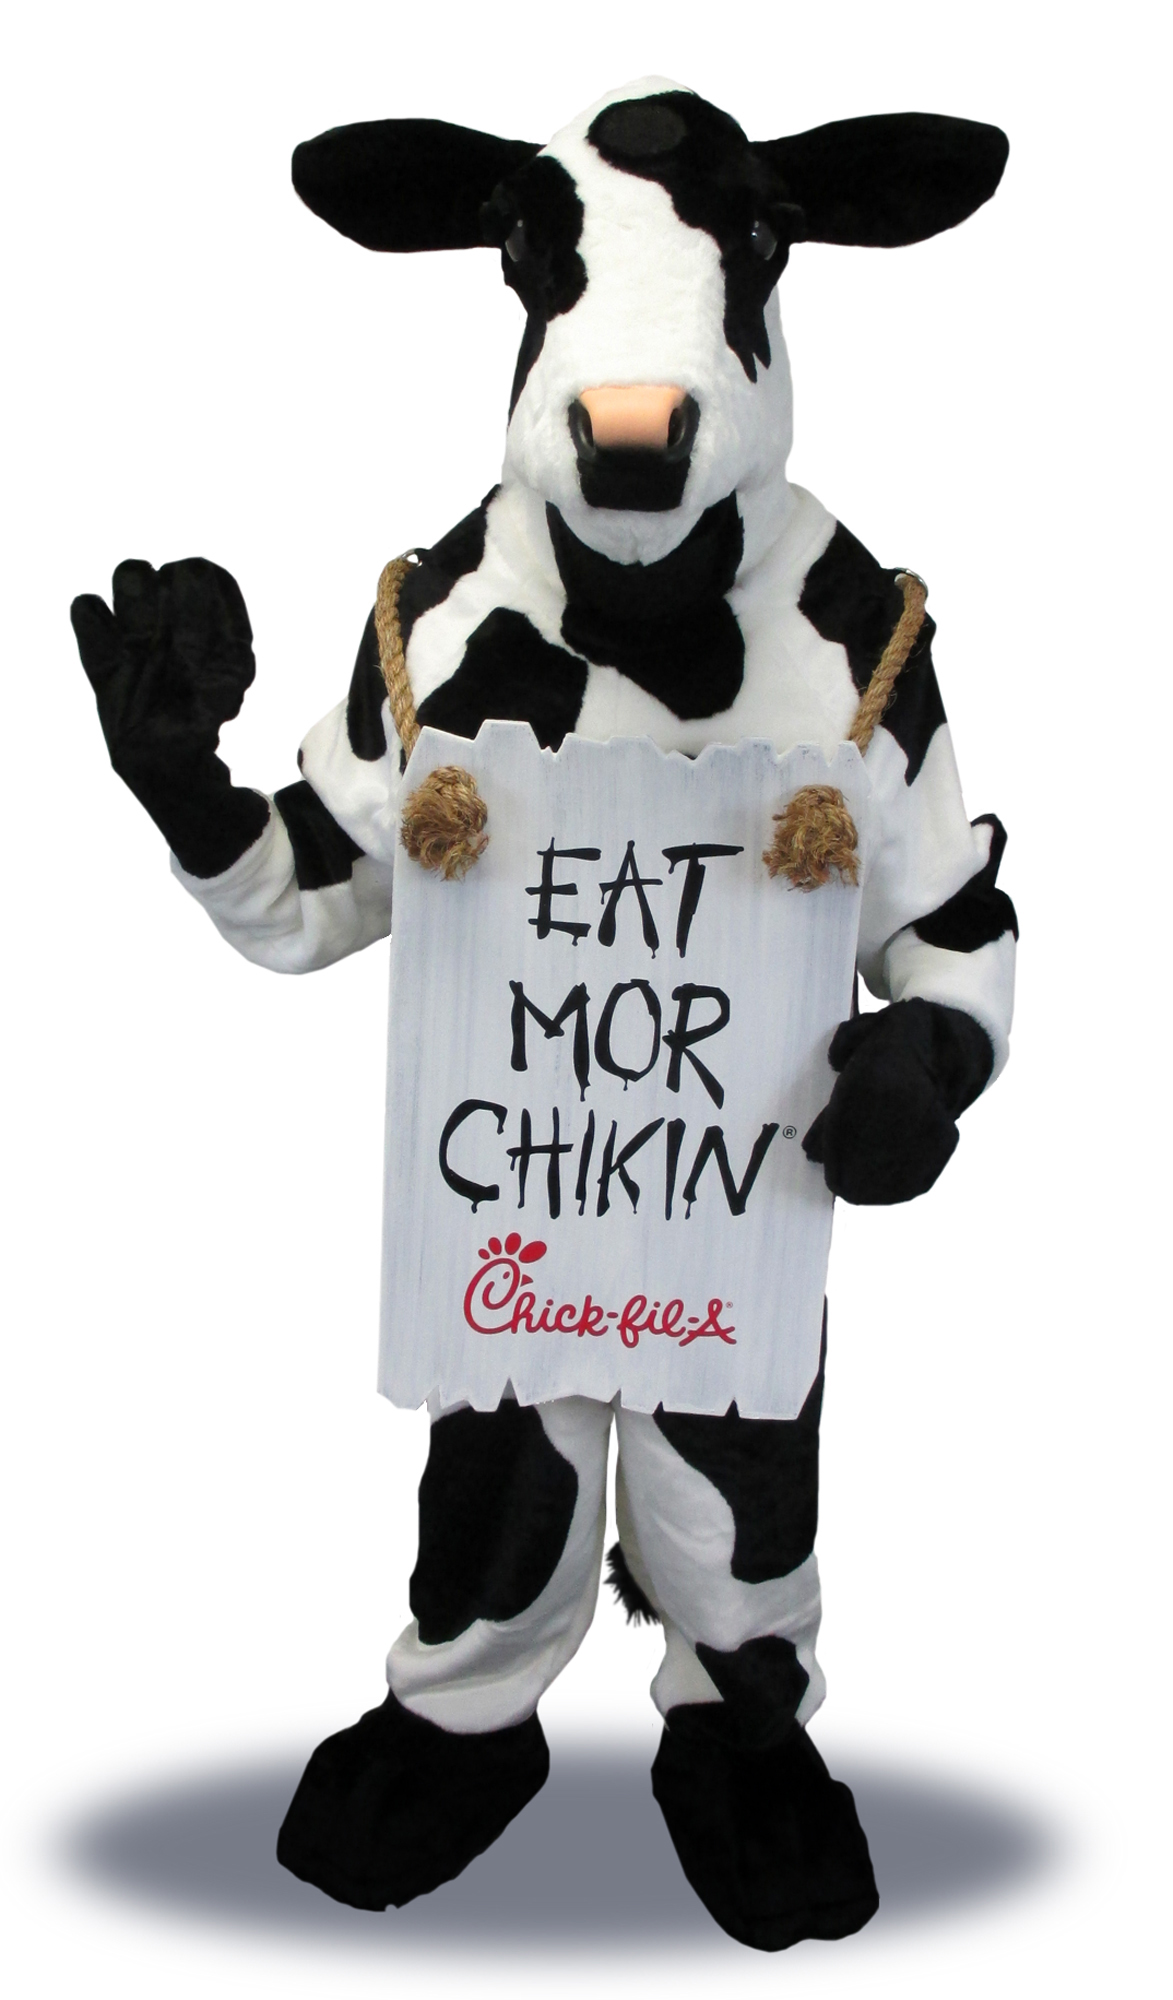 https://d1fd34dzzl09j.cloudfront.net/Images/CFACOM/Stories%20Images/2015/07%20July/20%20Years%20of%20Cows/Cow%20Mascot%20Costume.jpg